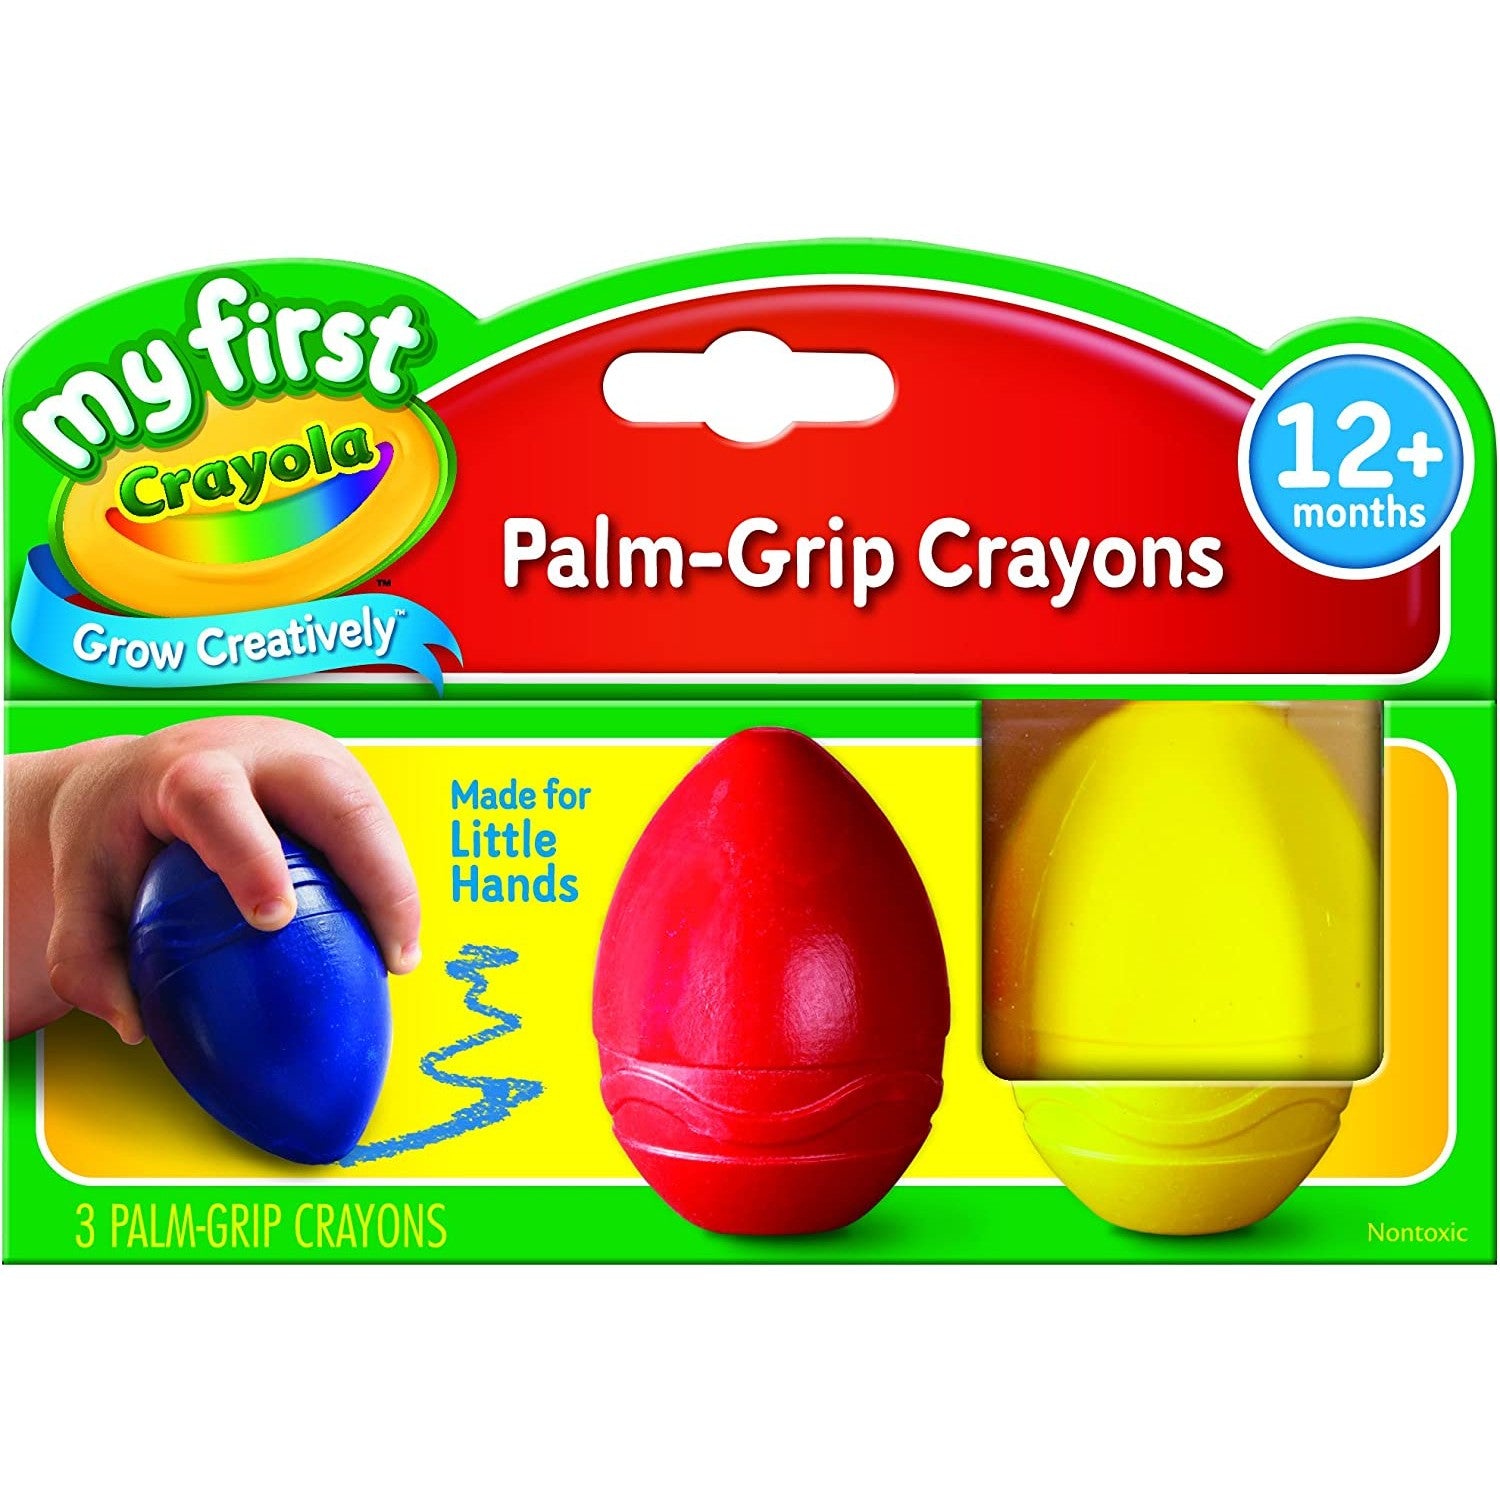 Introducing Crayola My First Egg Crayons - A must-have item for parent –